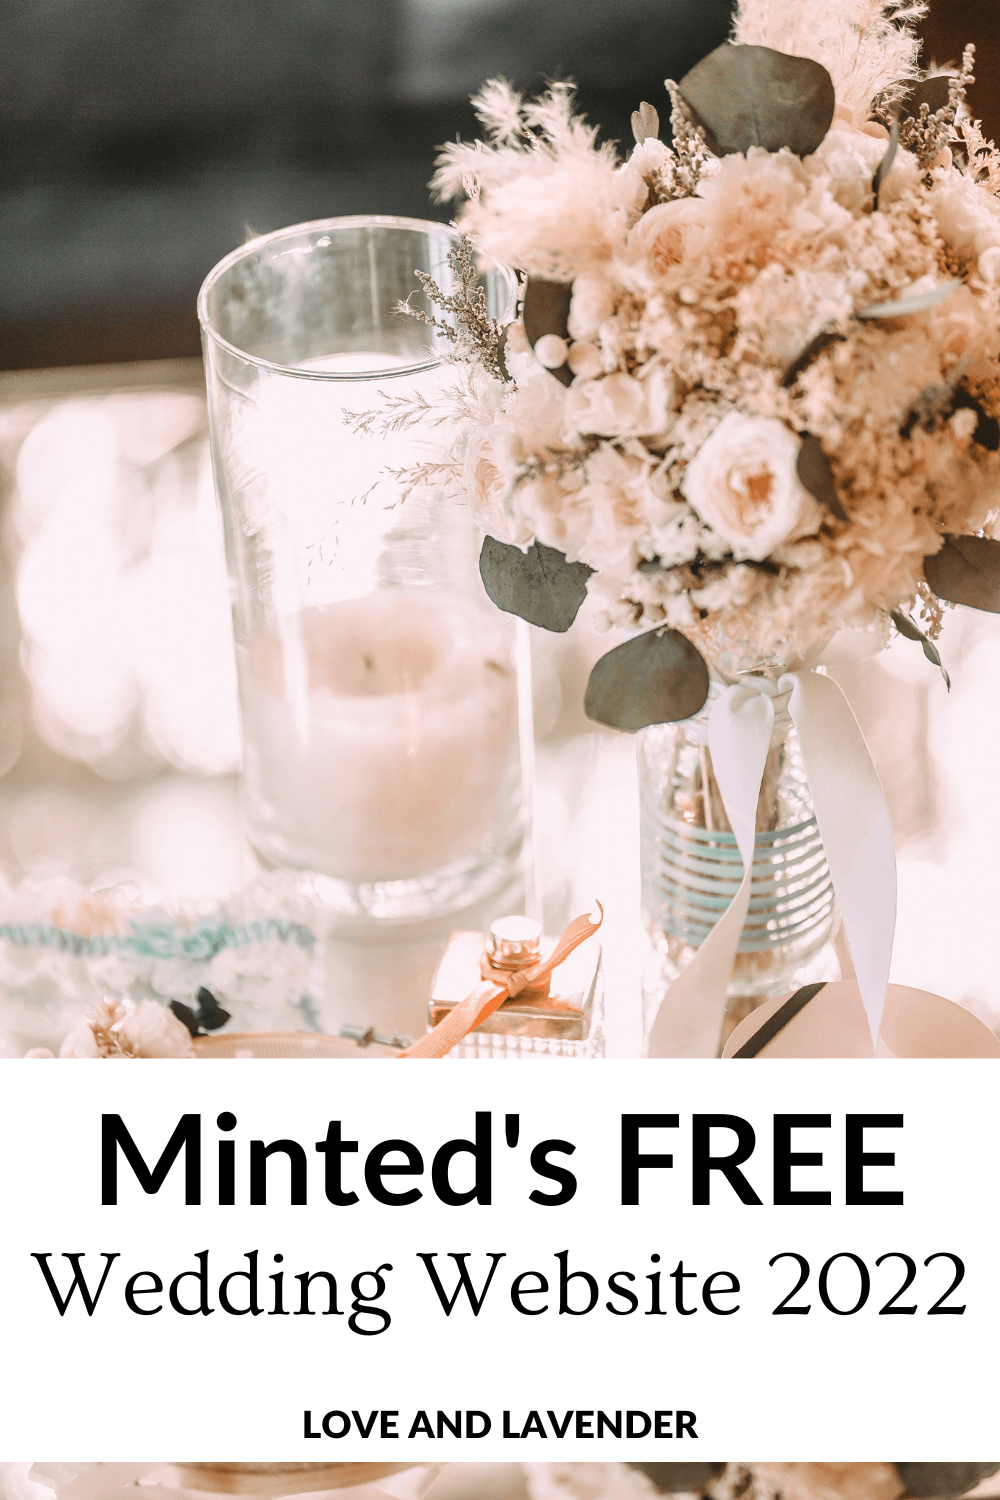 Create a beautiful wedding website with Minted in just minutes. Connect your RSVP list, order items through our curated collection, streamline communications with your guests and find inspiration for your wedding theme all in one place!